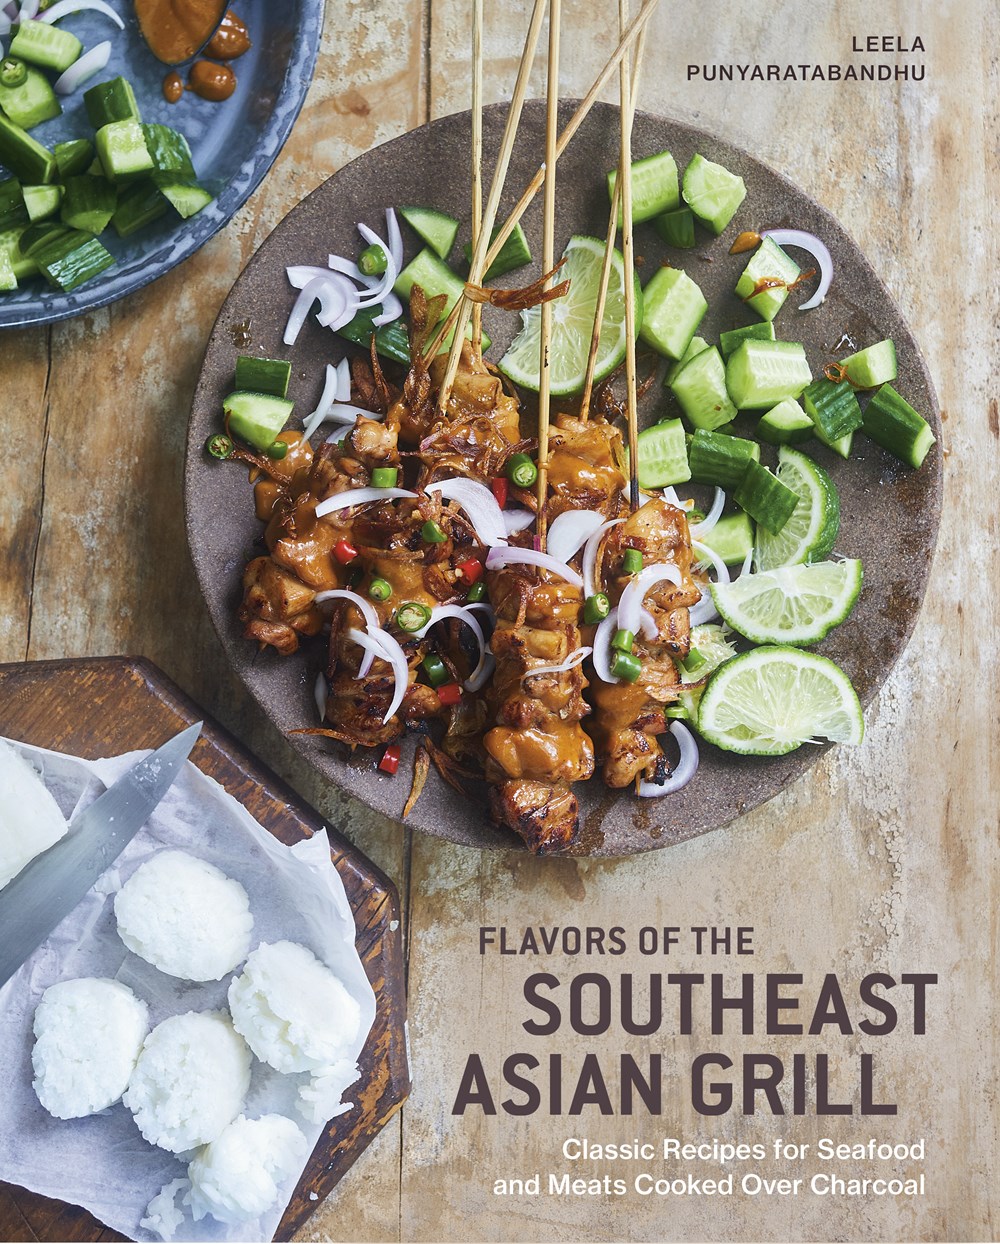  Flavors of the Southeast Asian Grill: Classic Recipes for Seafood and Meats Cooked Over Charcoal [A Cookbook]